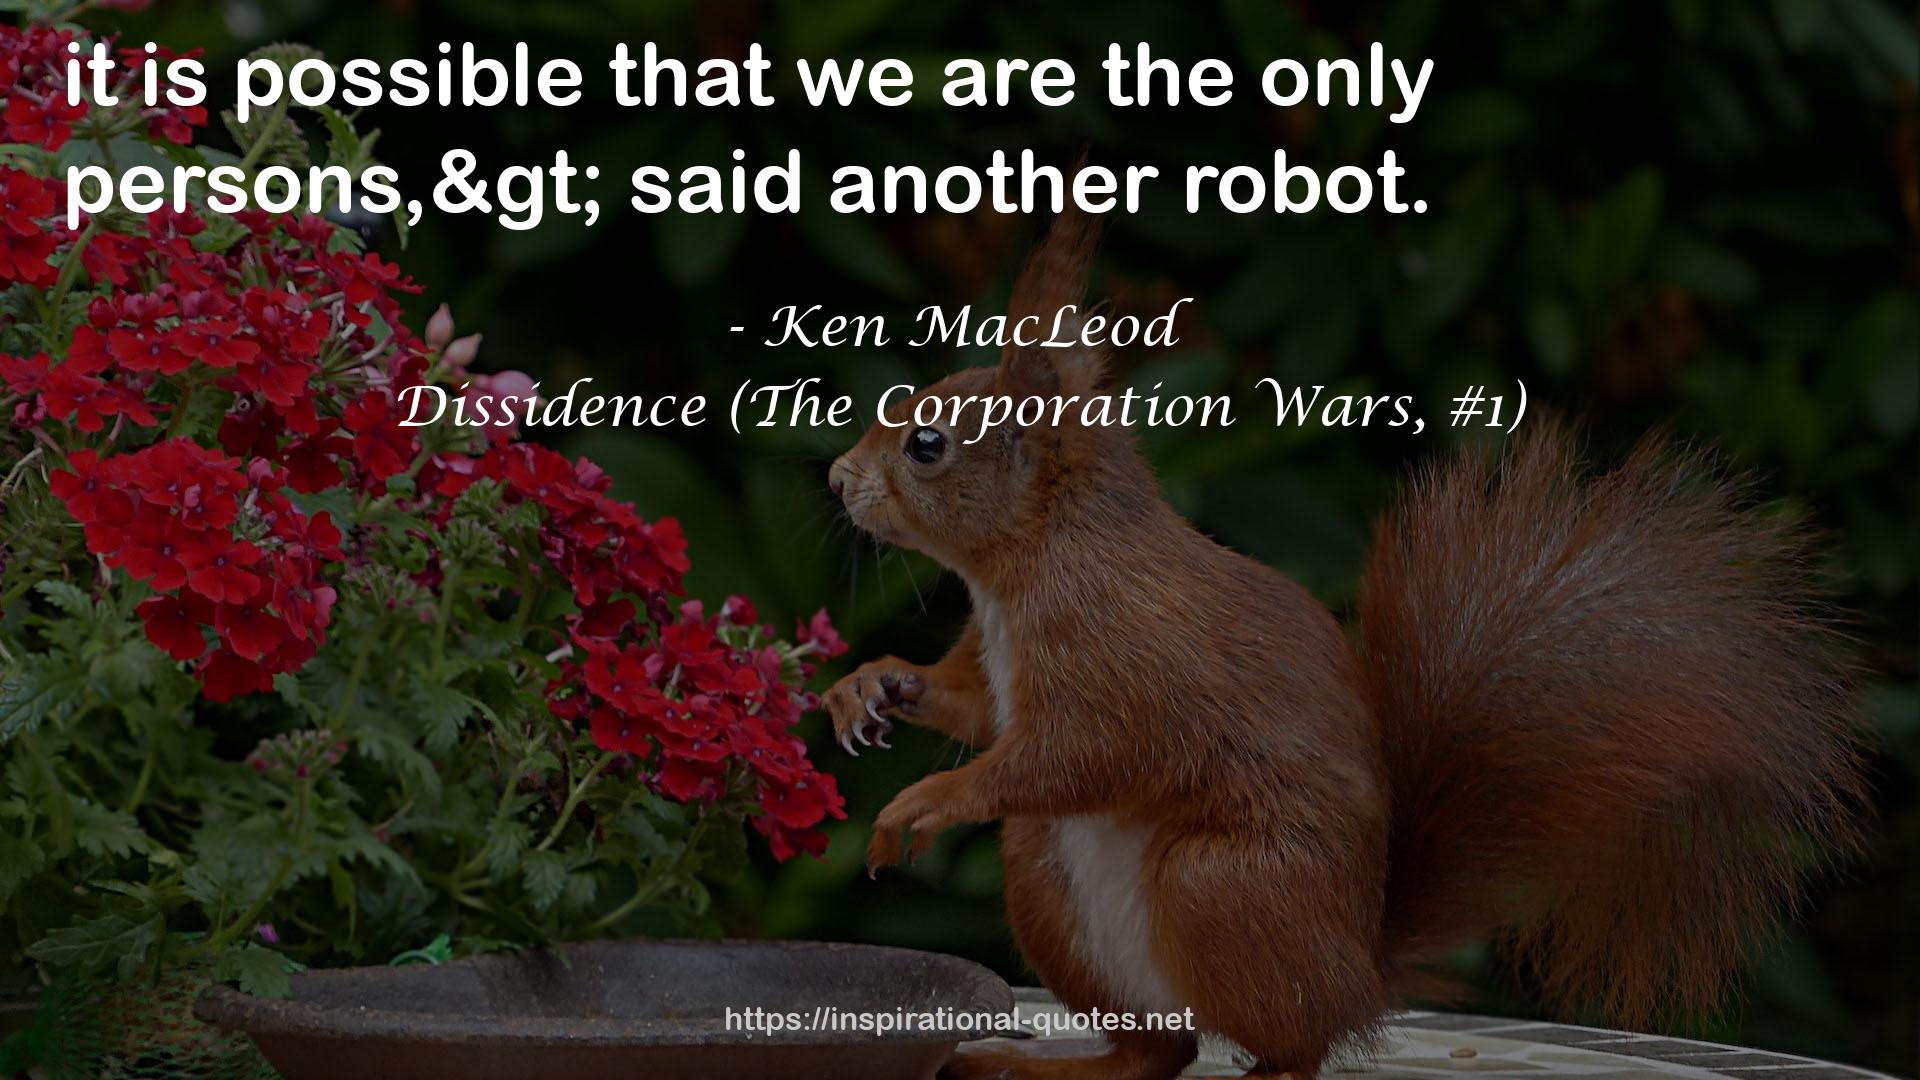 Dissidence (The Corporation Wars, #1) QUOTES